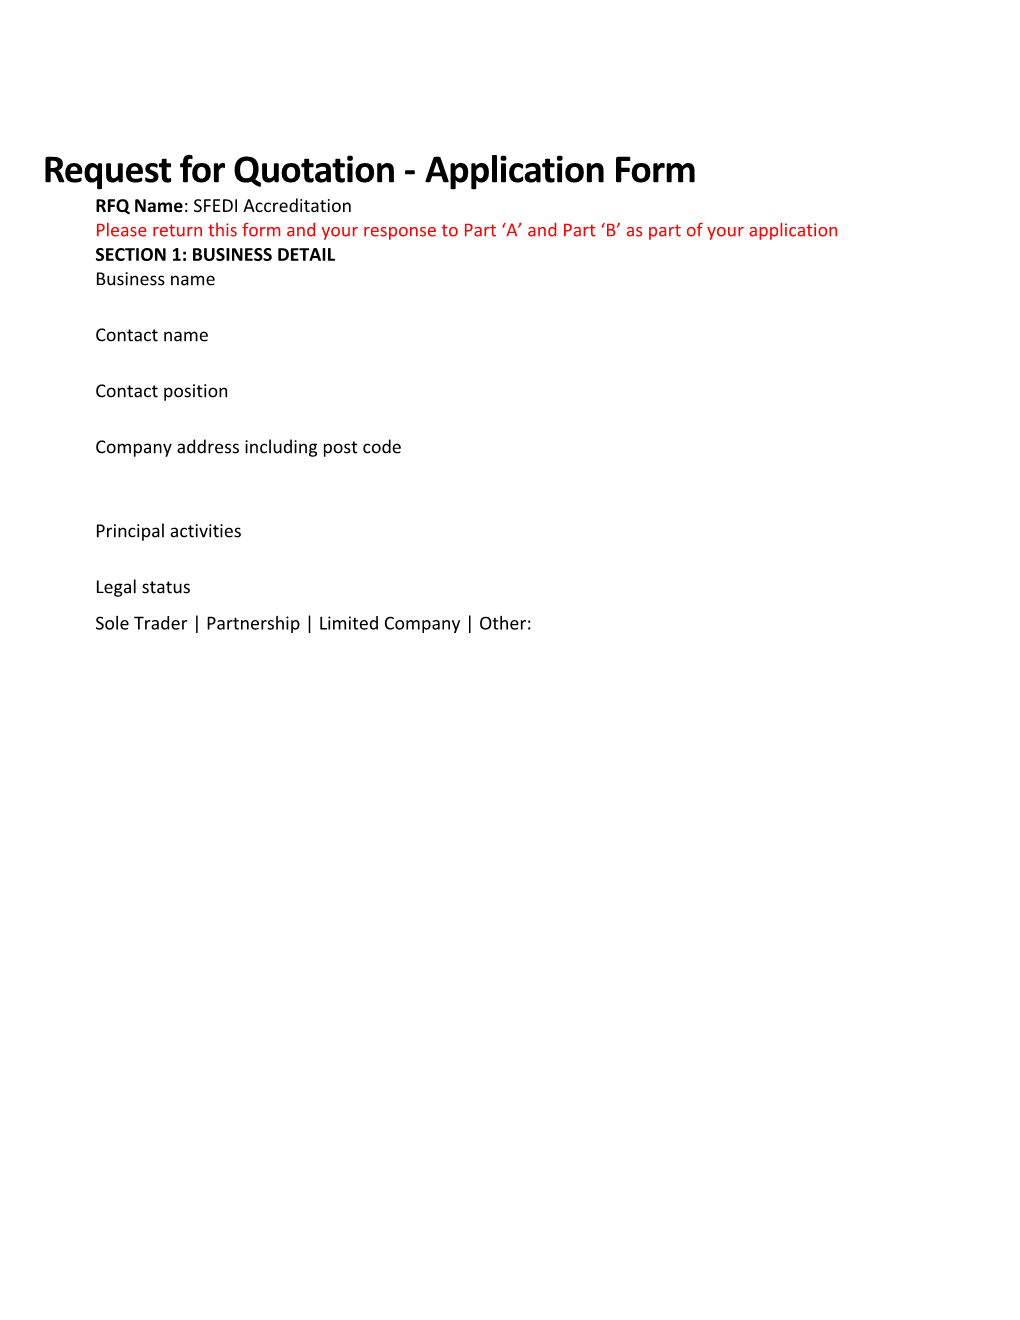 Request for Quotation -Application Form